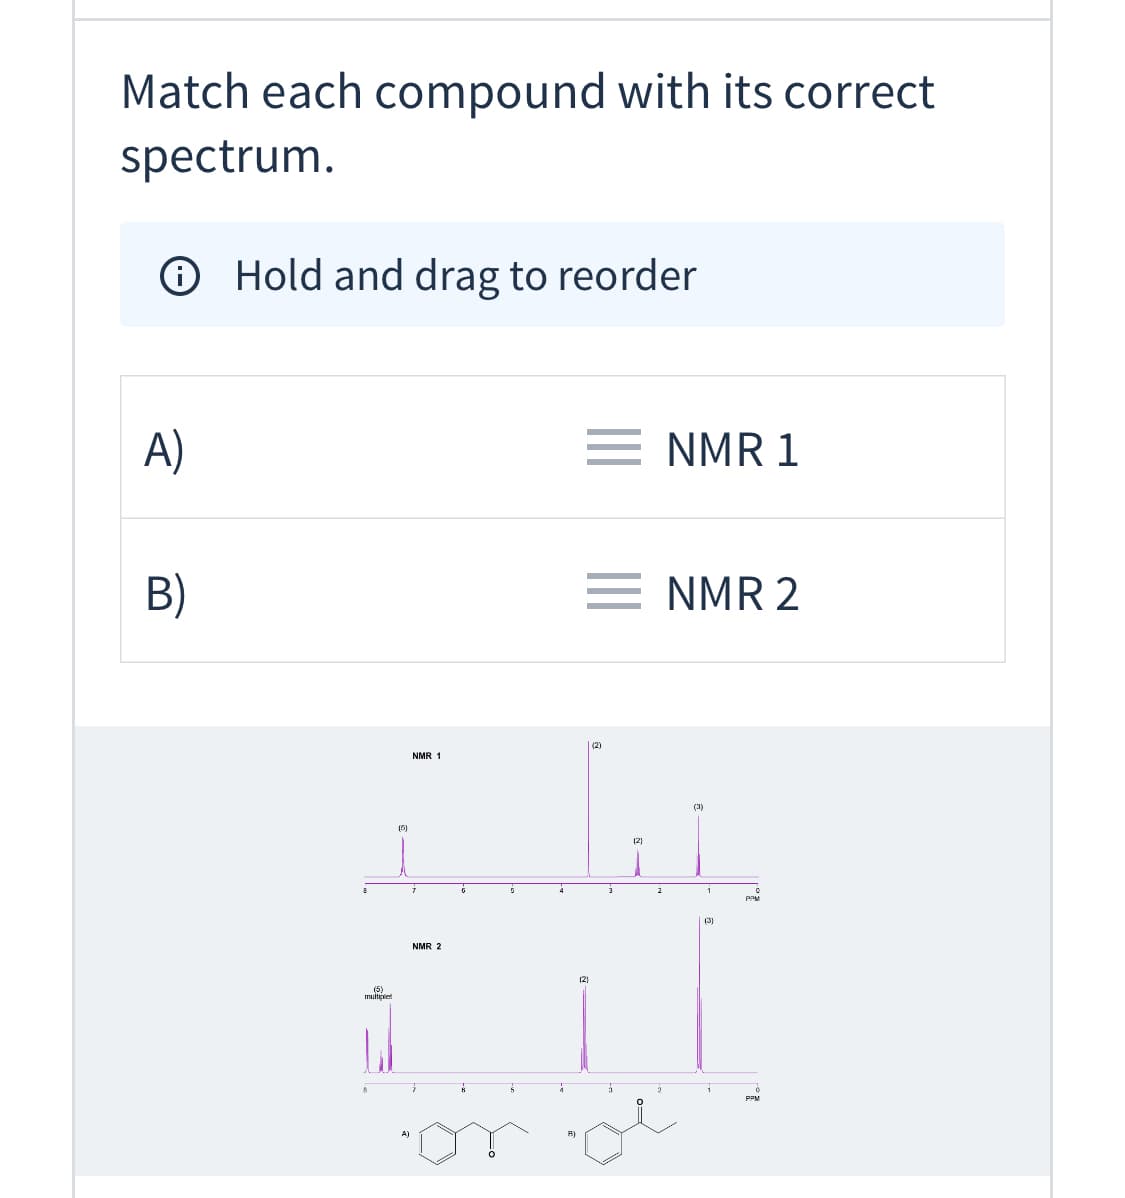 Match each compound with its correct
spectrum.
O Hold and drag to reorder
A)
E NMR 1
B)
E NMR 2
|(2)
NMR 1
(3)
(5)
12)
2
1
PPM
(3)
NMR 2
(2)
(5)
multibiet
PPM
B)
